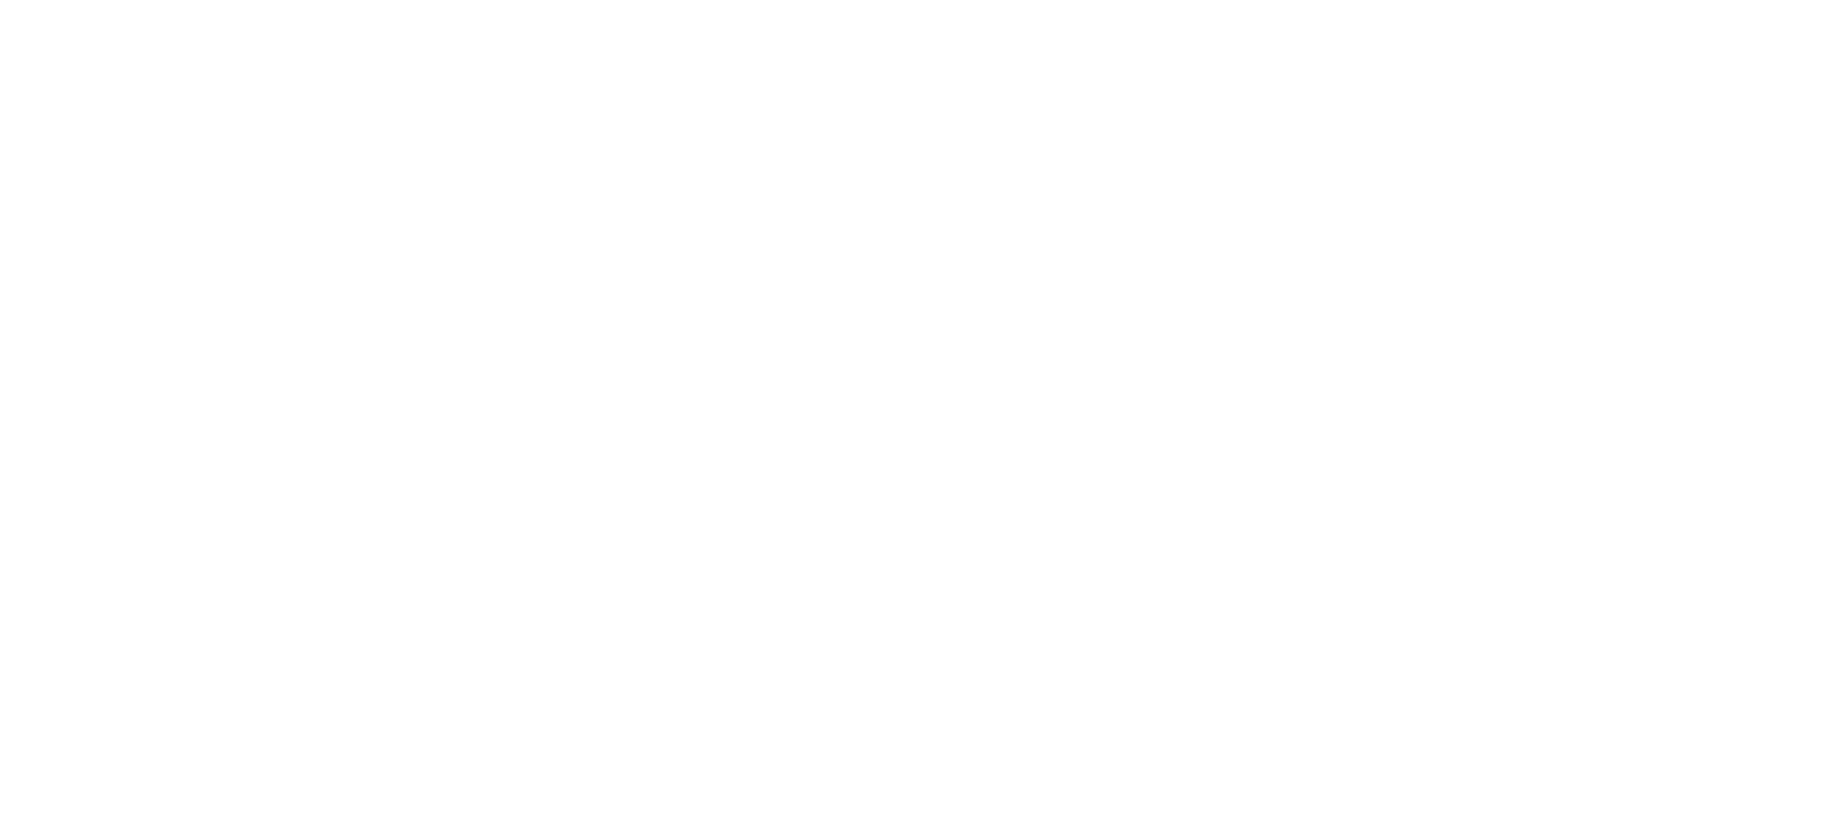 2023-2027 Strategic Plan growing with care